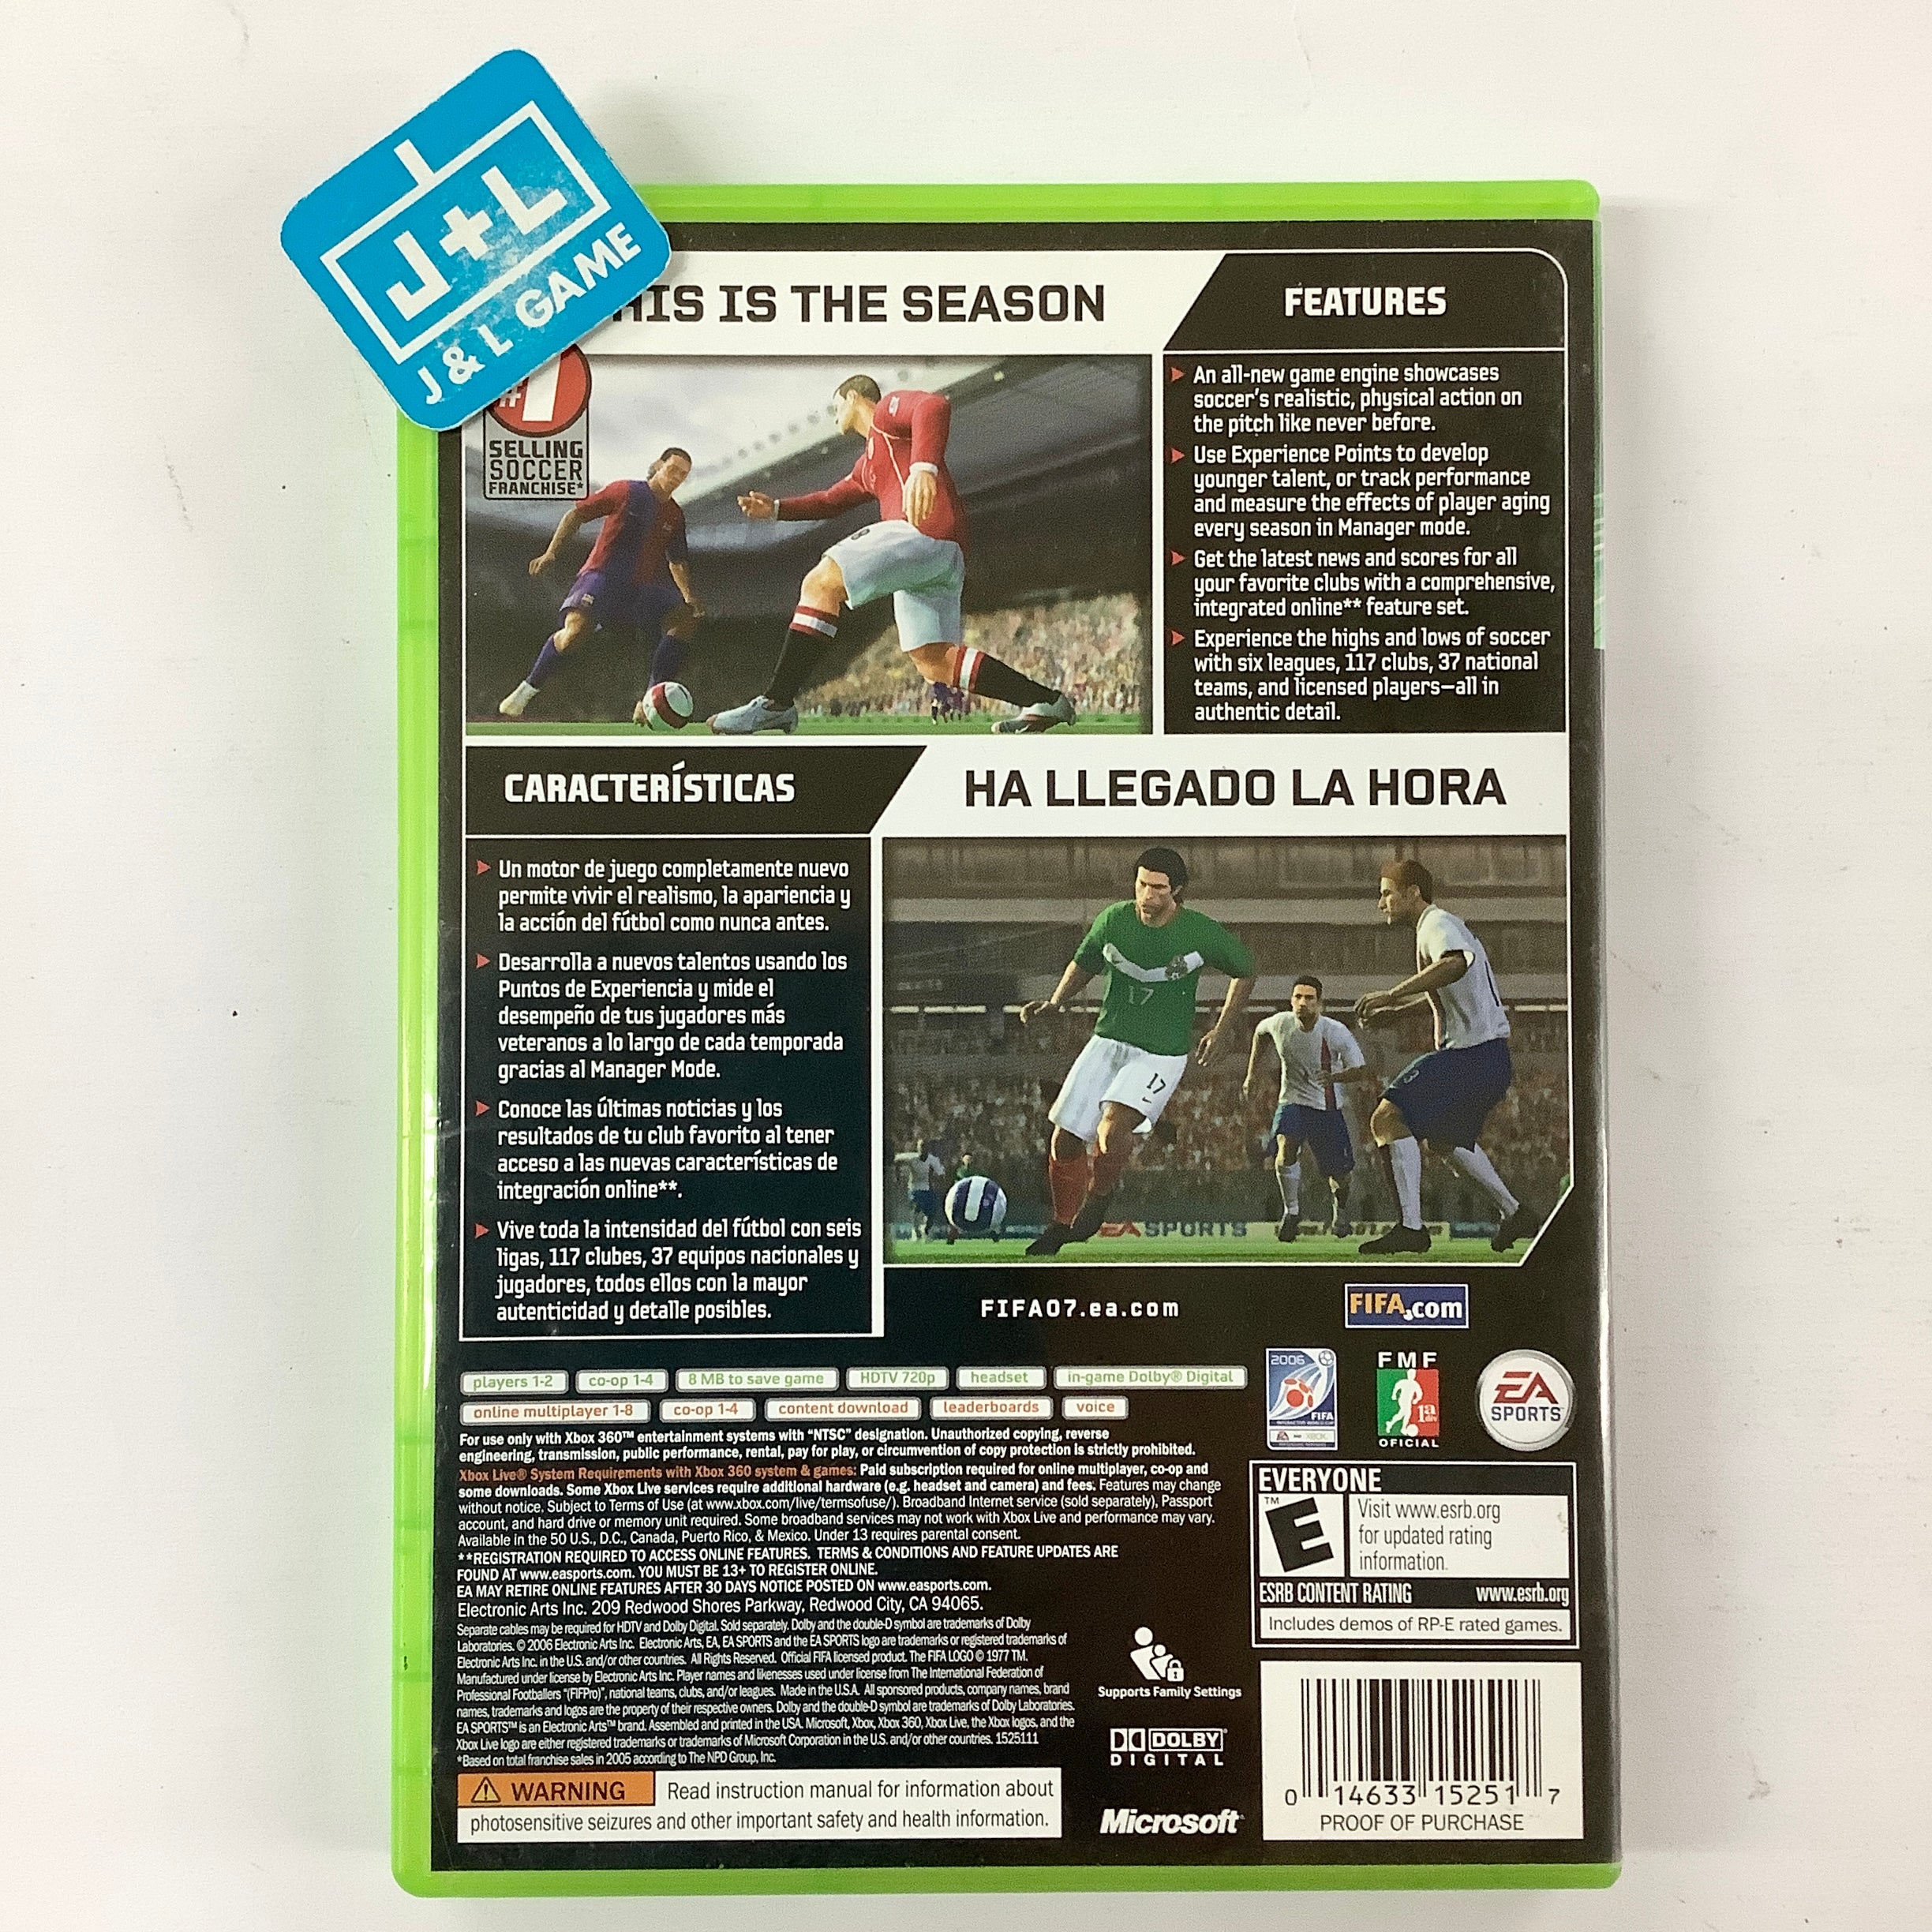 FIFA 07 Soccer - Xbox 360 [Pre-Owned] Video Games EA Sports   